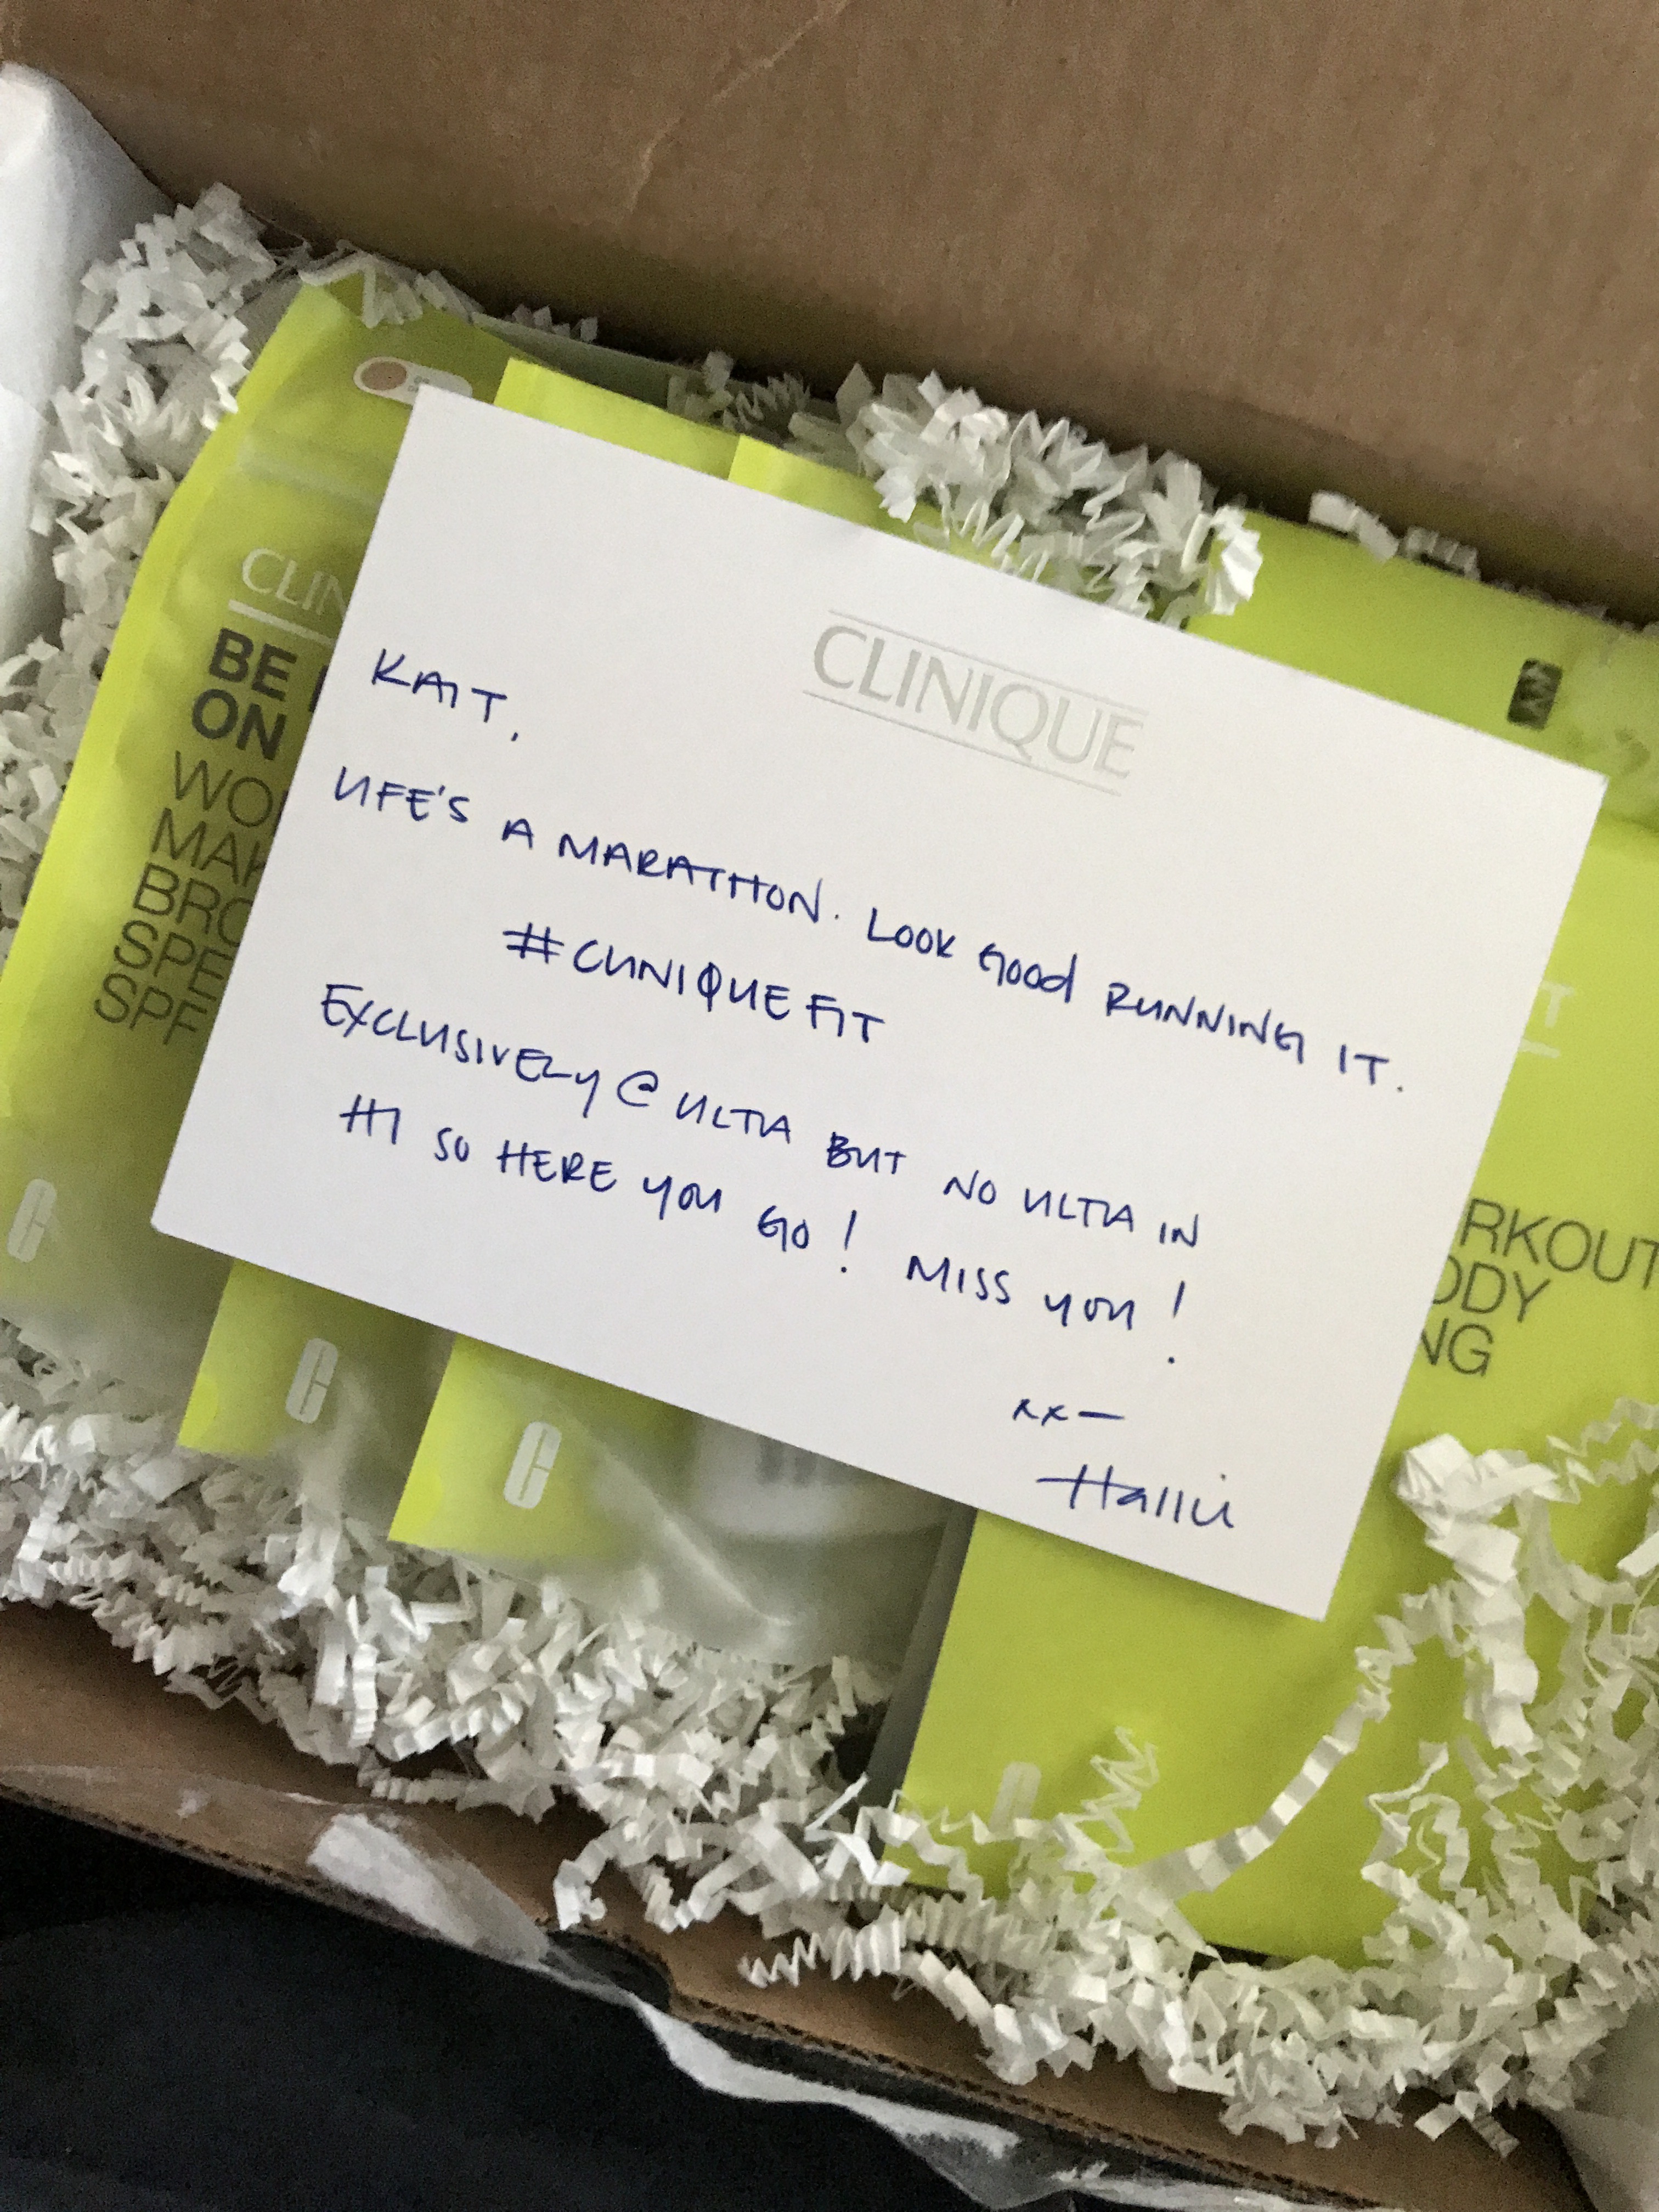 Clinique Fit - 7 Things You Need To Know Right Now - Communikait